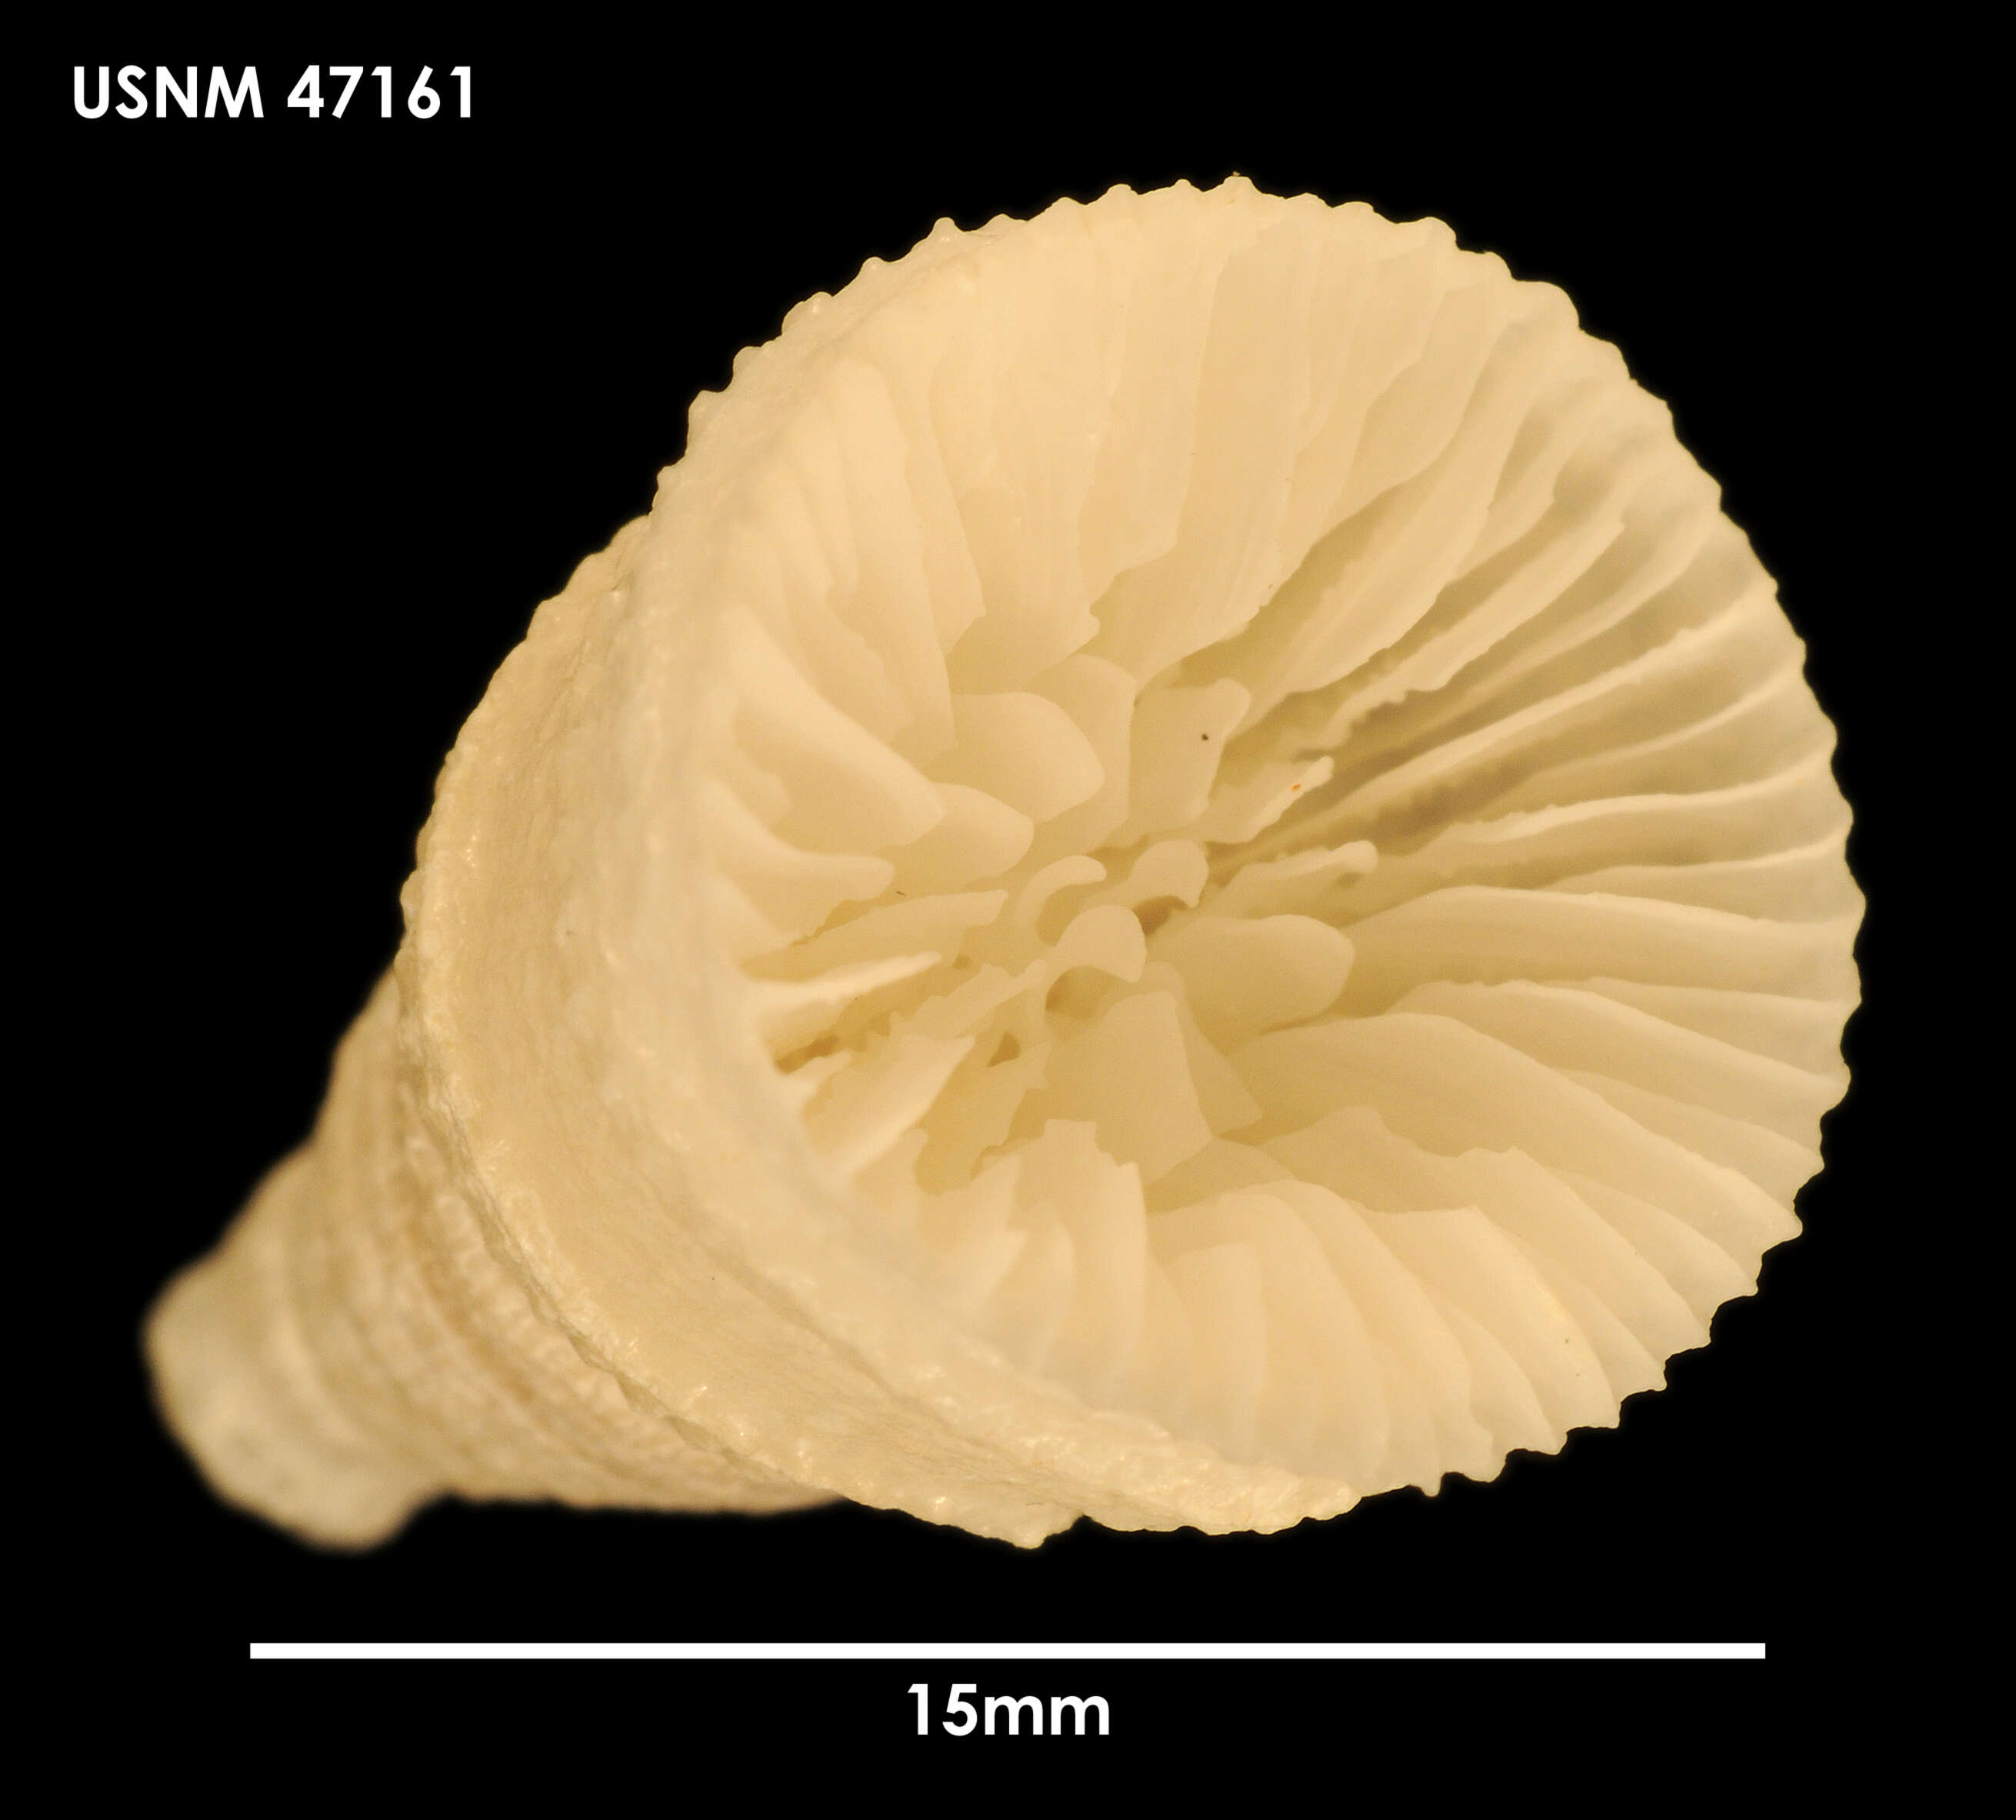 Image of caryophylliid corals